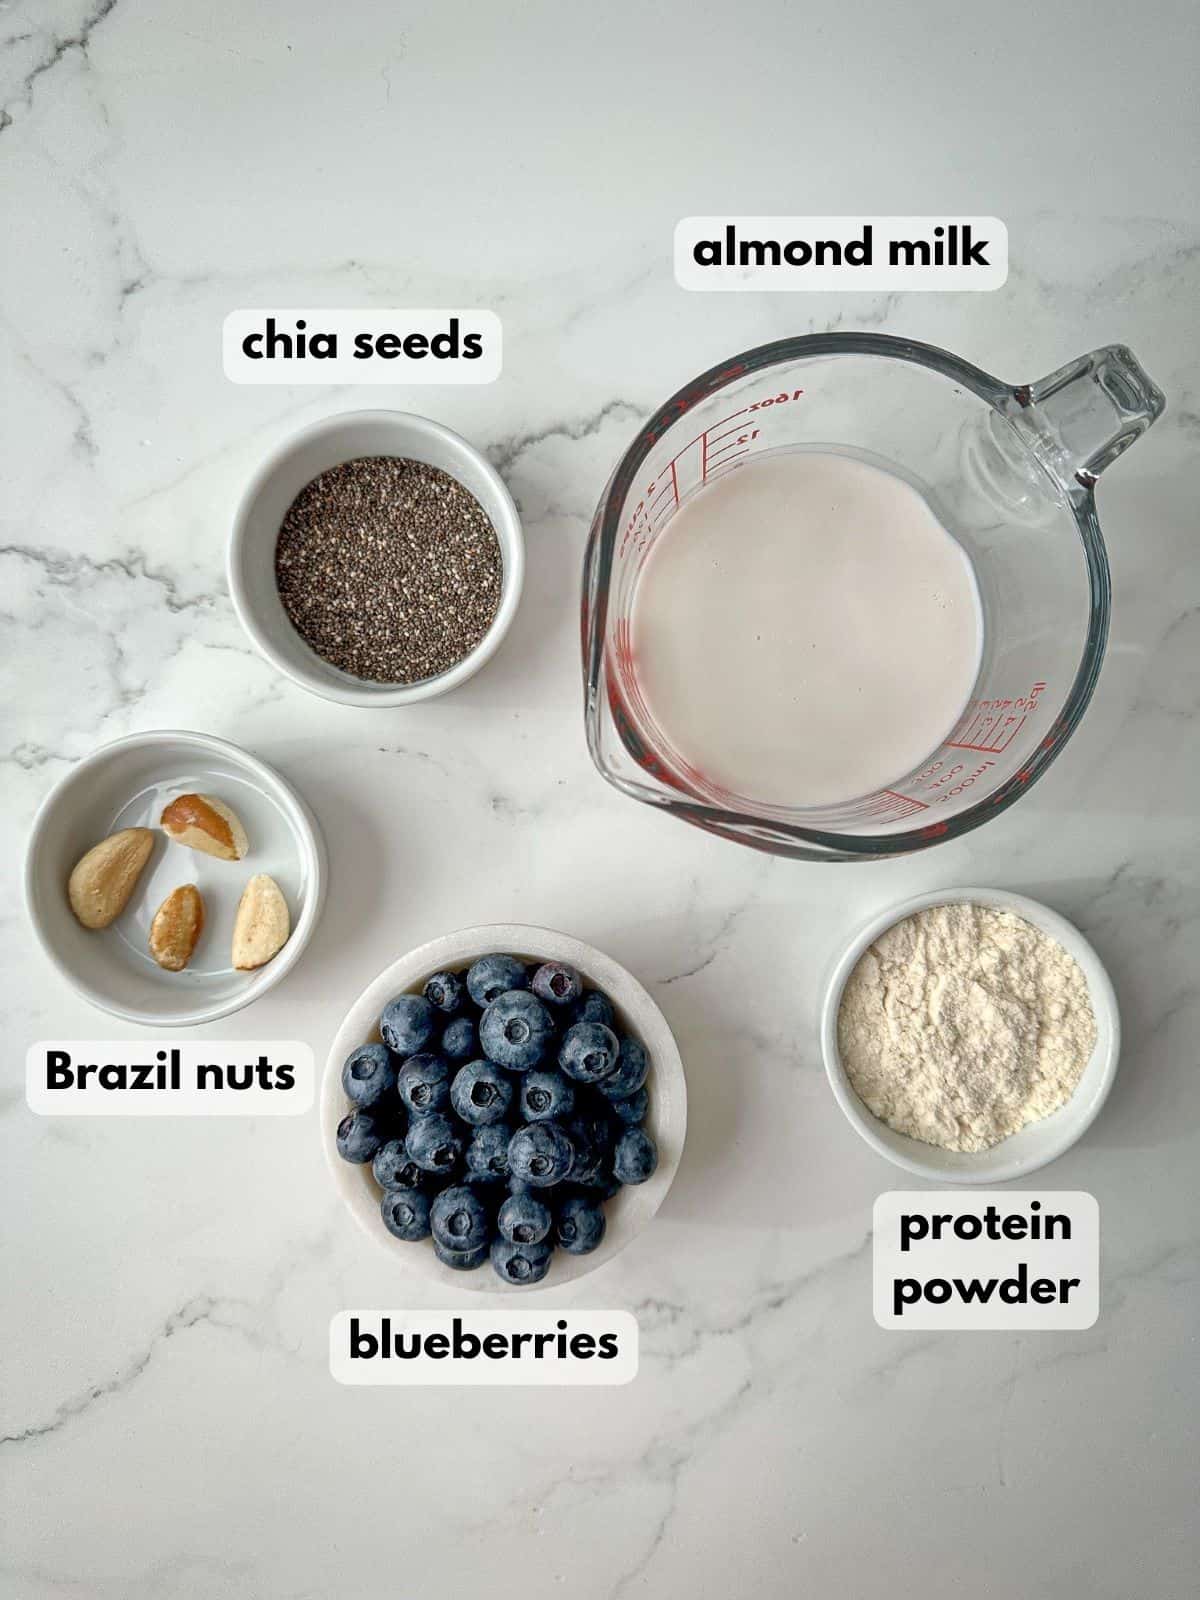 Ingredients needed to make a blueberry protein shake include blueberries, almond milk, chia seeds, and Brazil nuts.